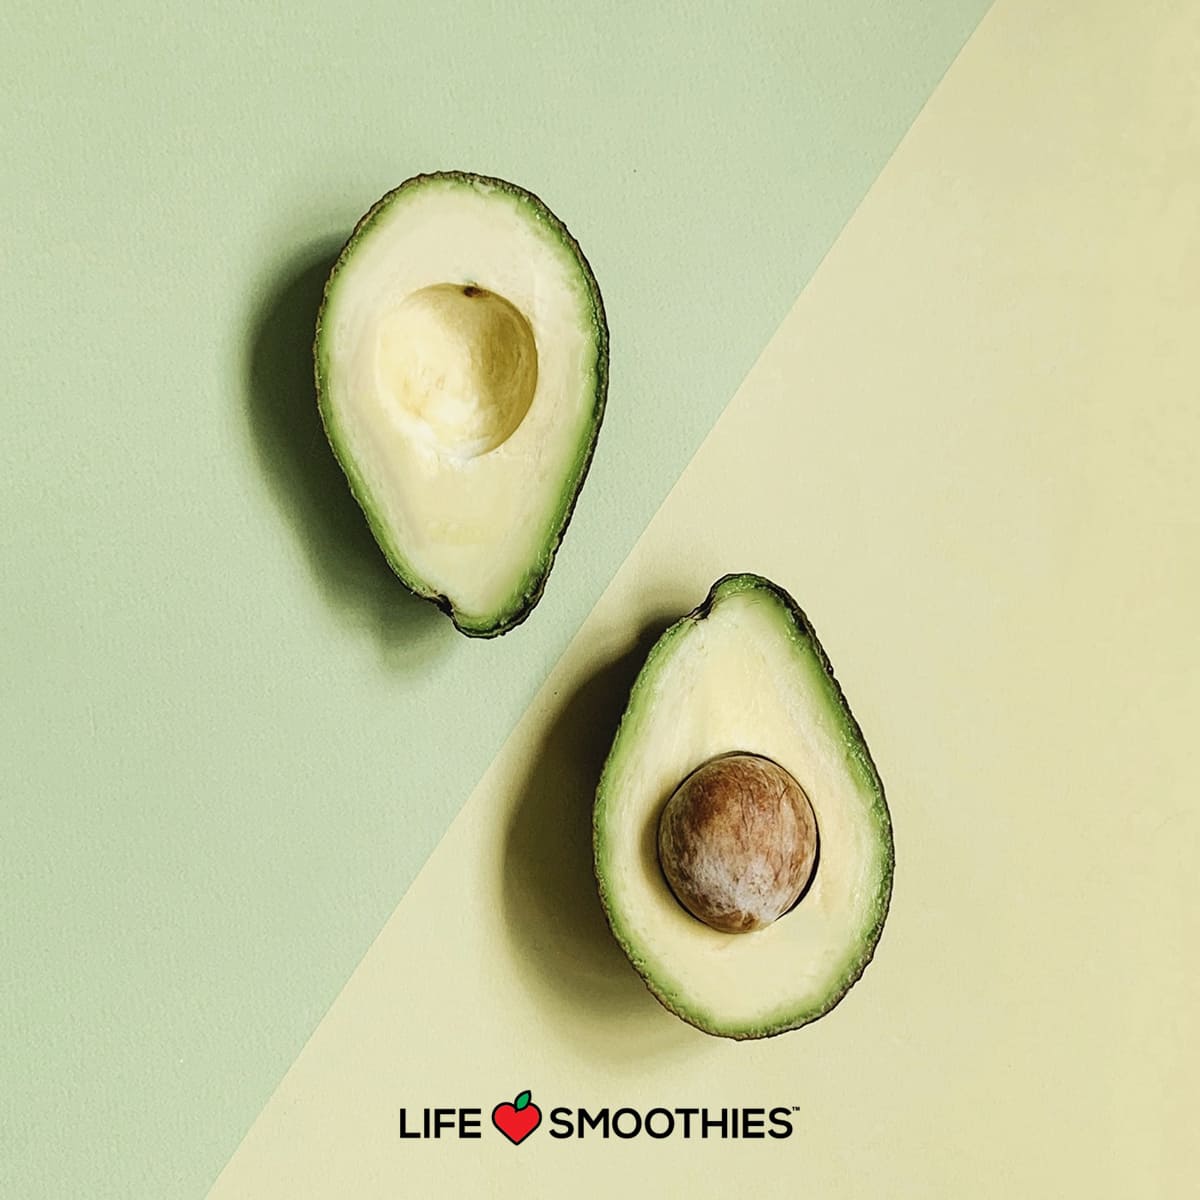 Avolicious, welcome to our Life Smoothies family